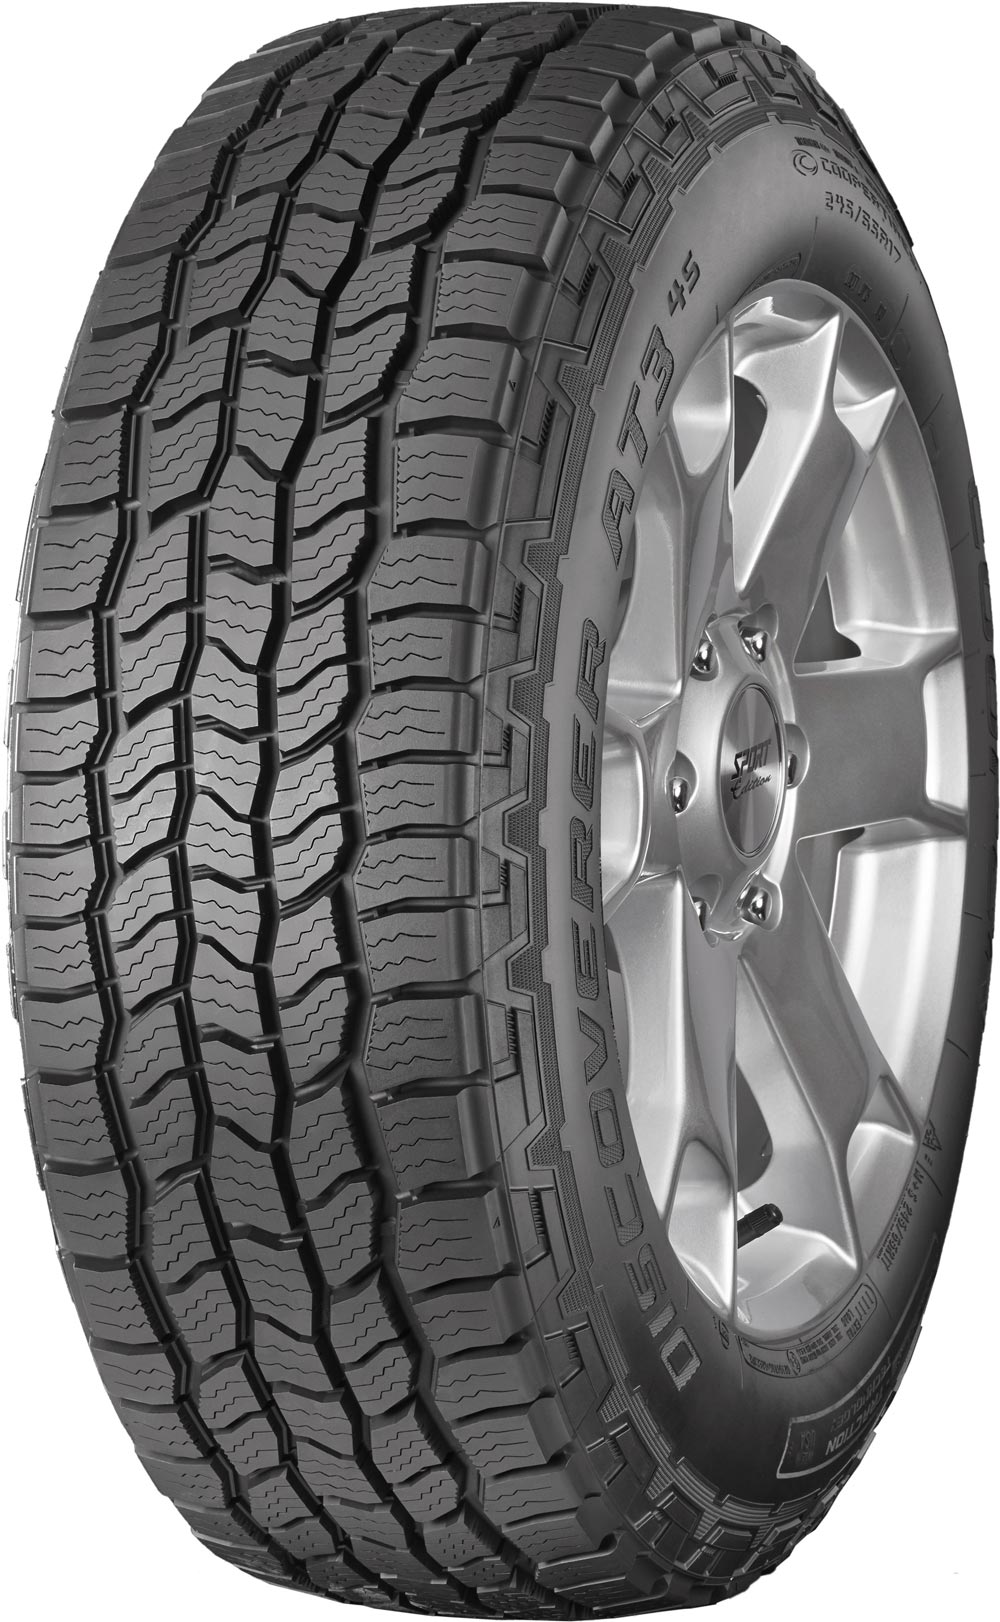 Джипови гуми COOPER DISCOVERER AT3 4S XL DOT 2019 245/65 R17 111T